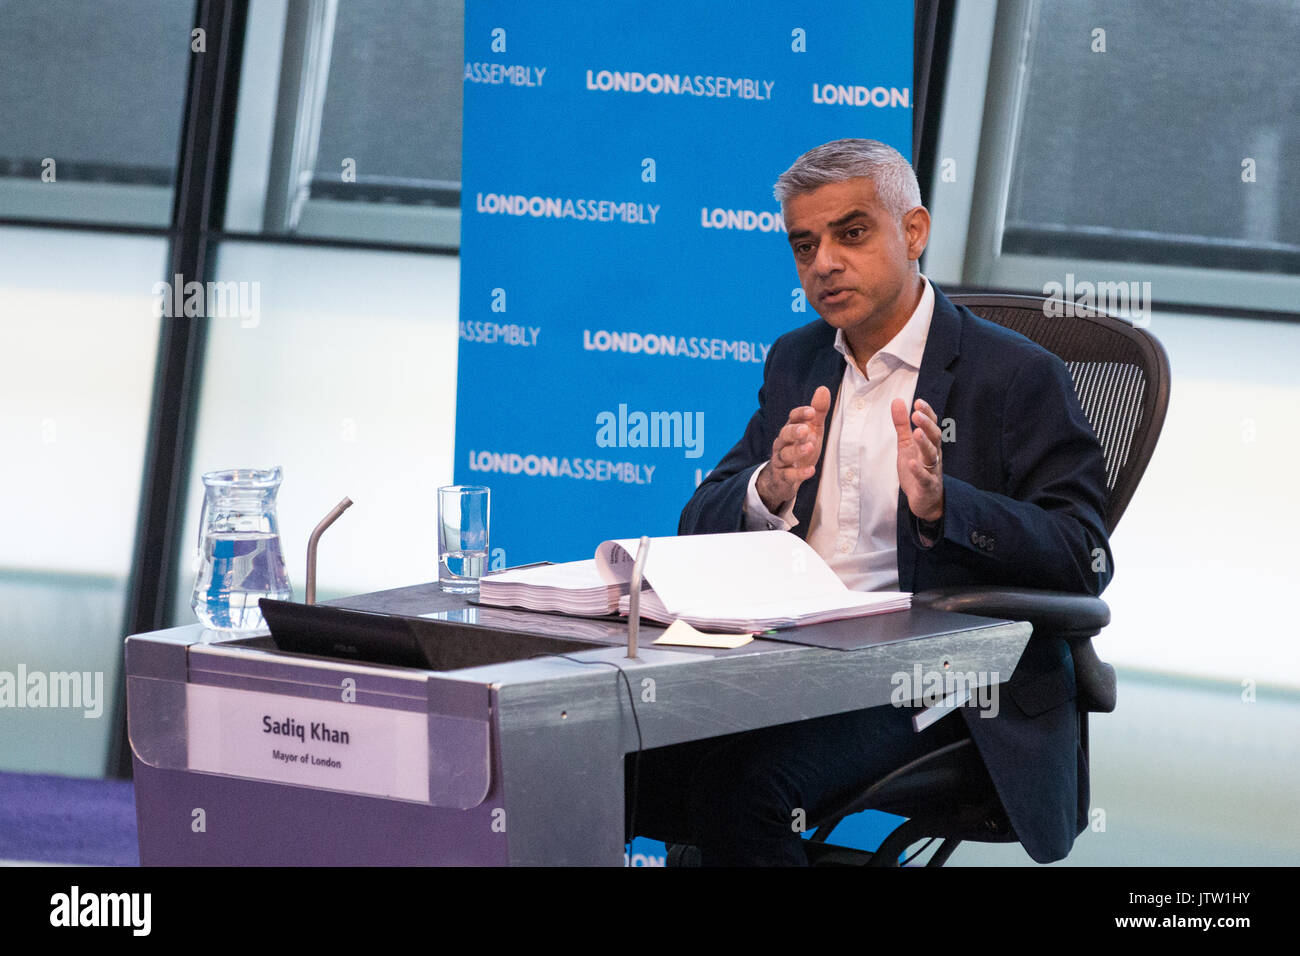 London, UK. 10th August, 2017. Mayor of London Sadiq Khan responds to questions from London Assembly Members during Mayor's Question Time at City Hall. Among topics discussed were: acid attacks, social housing, expenditure on fire and police services, 4G coverage on underground trains and noise from overnight underground trains. Credit: Mark Kerrison/Alamy Live News Stock Photo